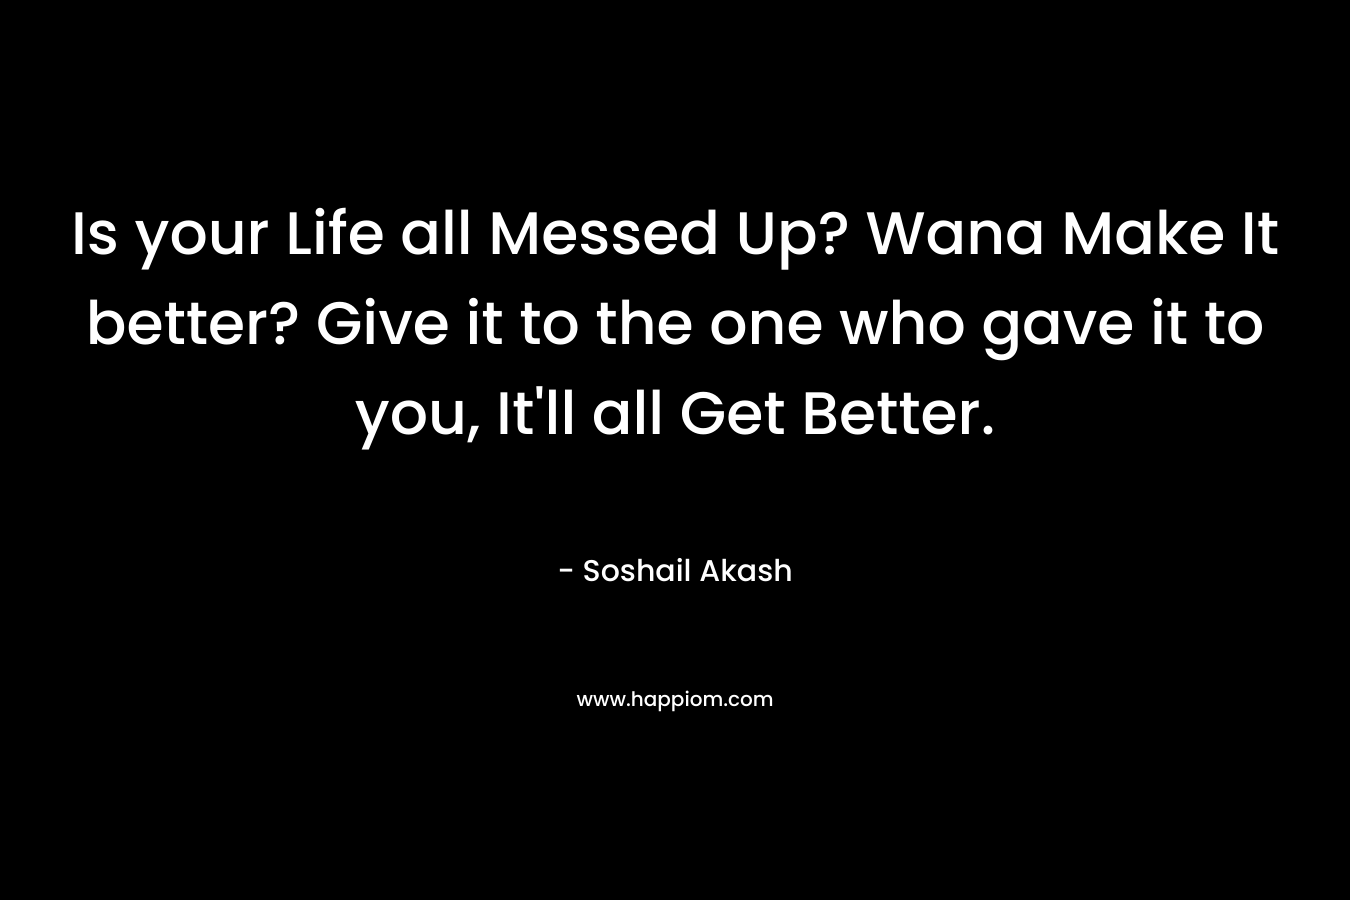 Is your Life all Messed Up? Wana Make It better? Give it to the one who gave it to you, It’ll all Get Better. – Soshail Akash